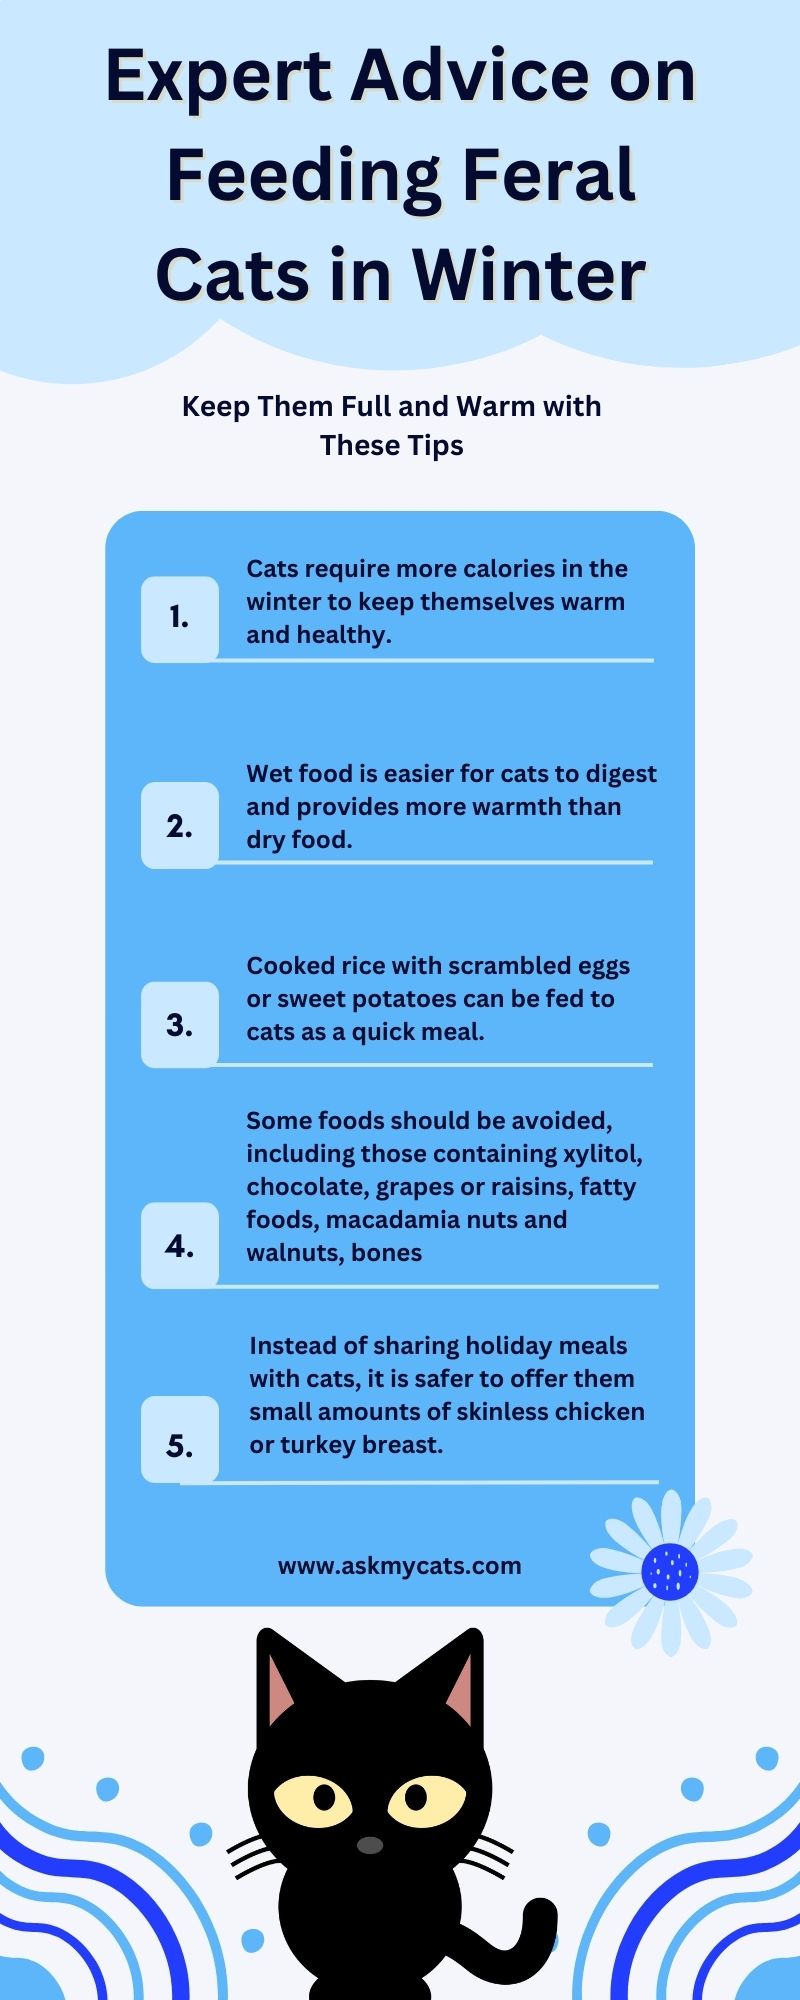 Expert Advice on Feeding Feral Cats in Winter (Infographic)